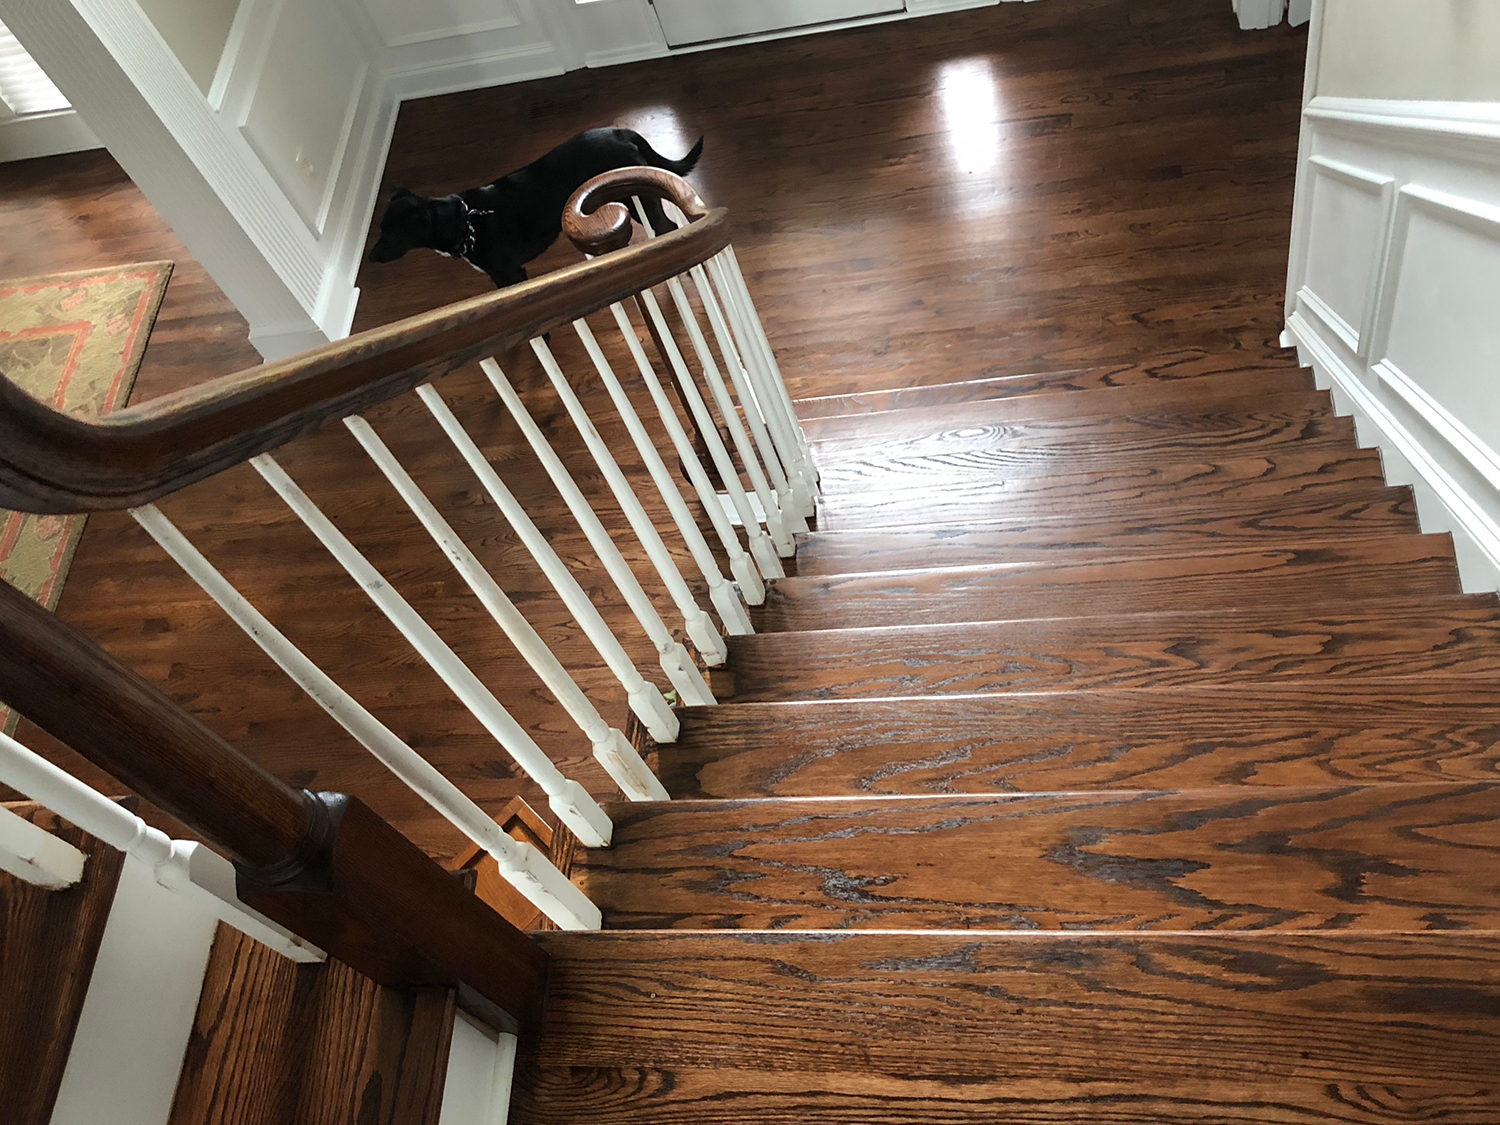 Amazonia Floors High Quality Hardwood Floors At Down To Earth Prices